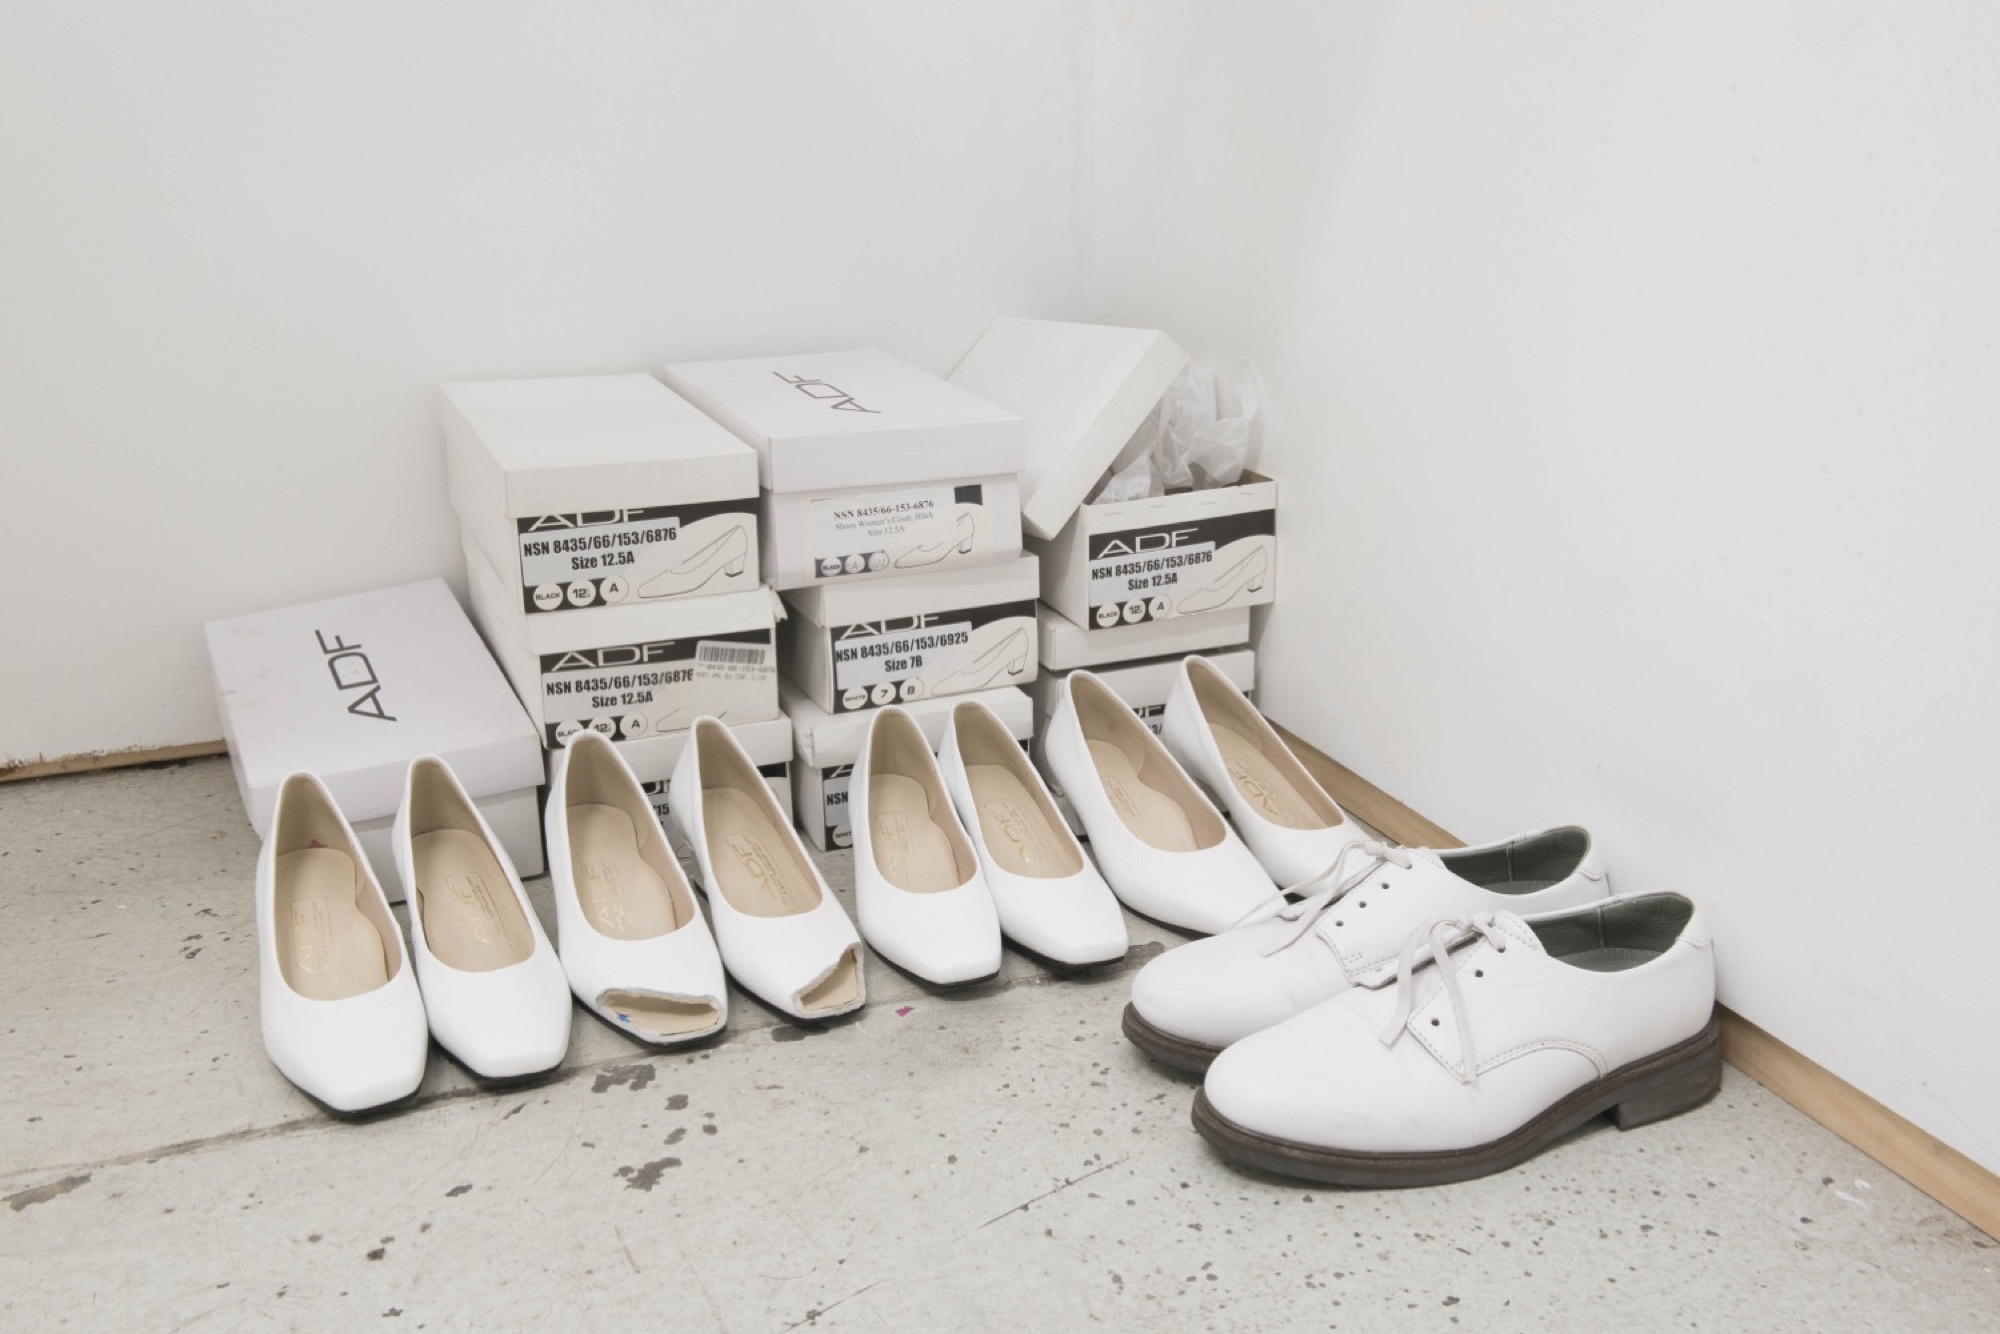 Rex Veal, <em>Parade Shoes</em>, 2020, Archive Australian Defence Force leather shoes and shoe boxes, dimensions variable. Bossy’s Gallery. Courtesy of Bossy’s gallery. Photo: Jordan Halsall.